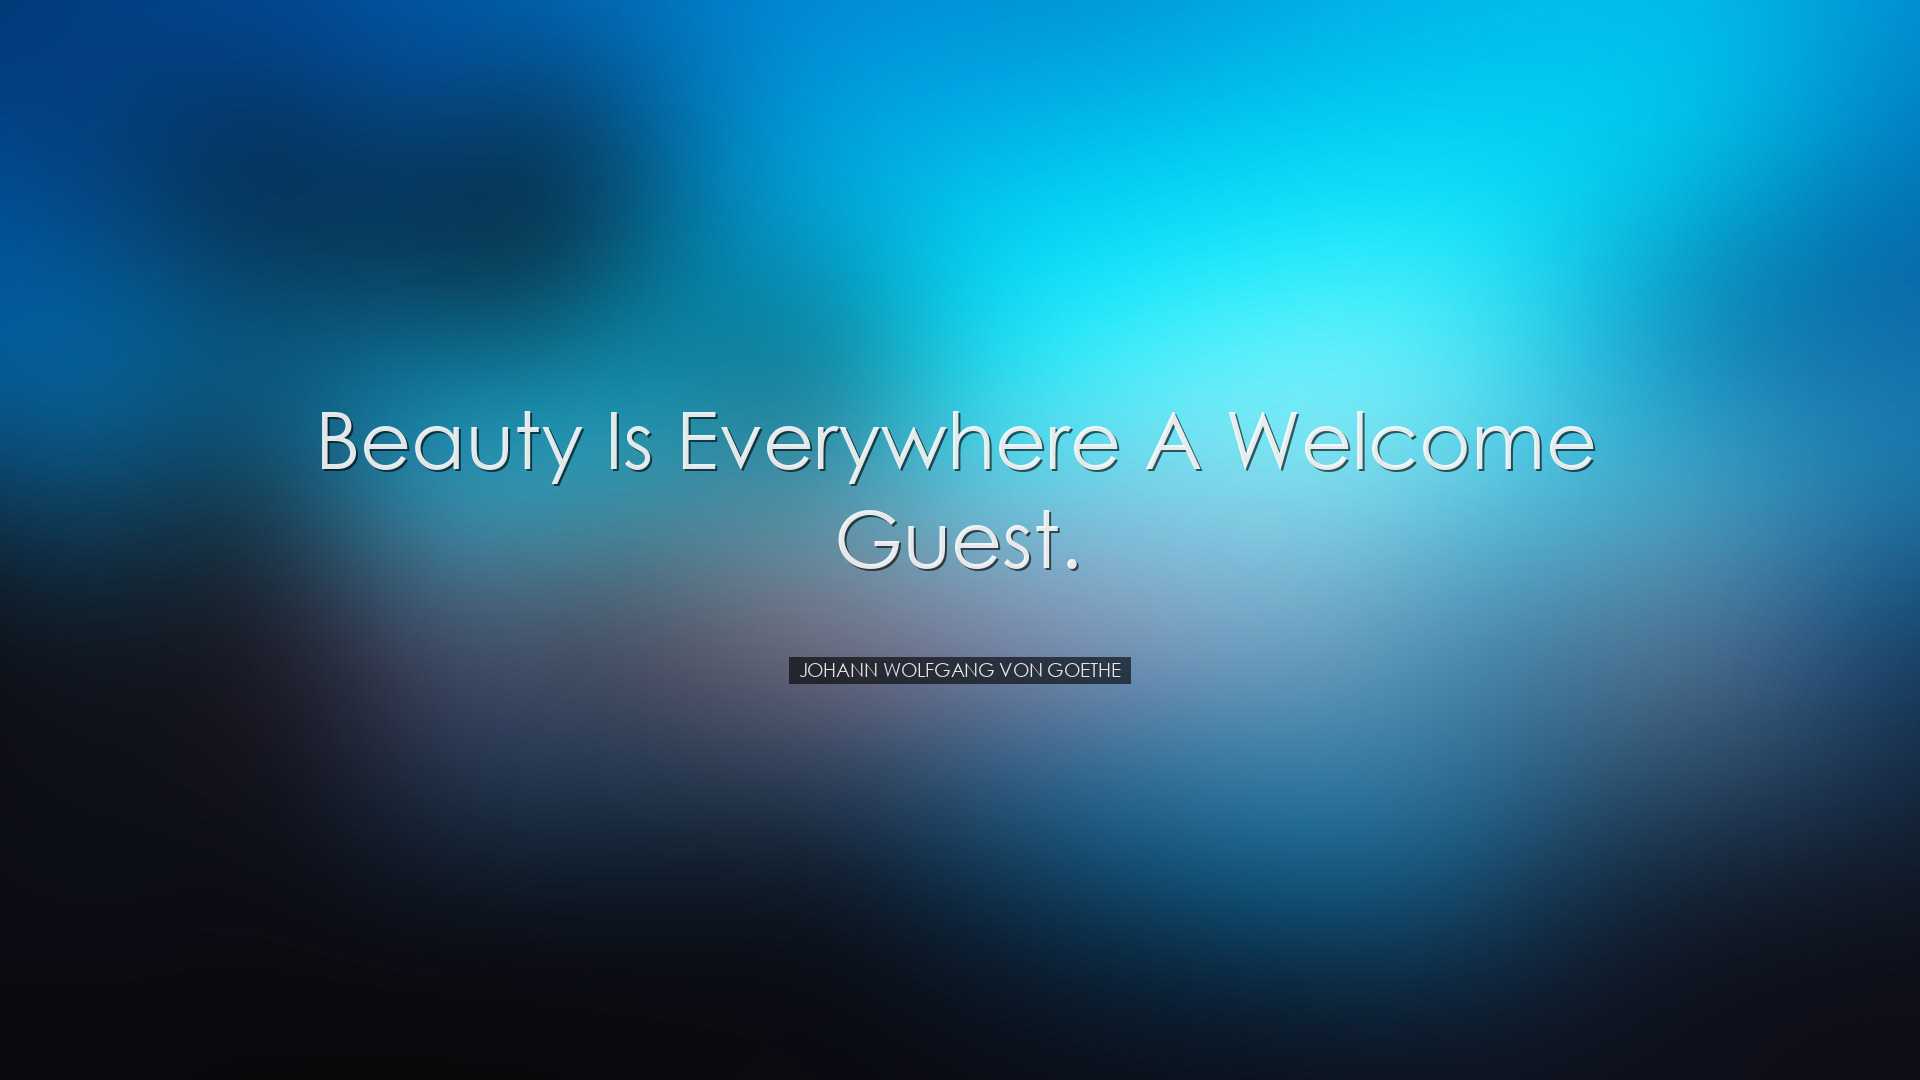 Beauty is everywhere a welcome guest. - Johann Wolfgang von Goethe